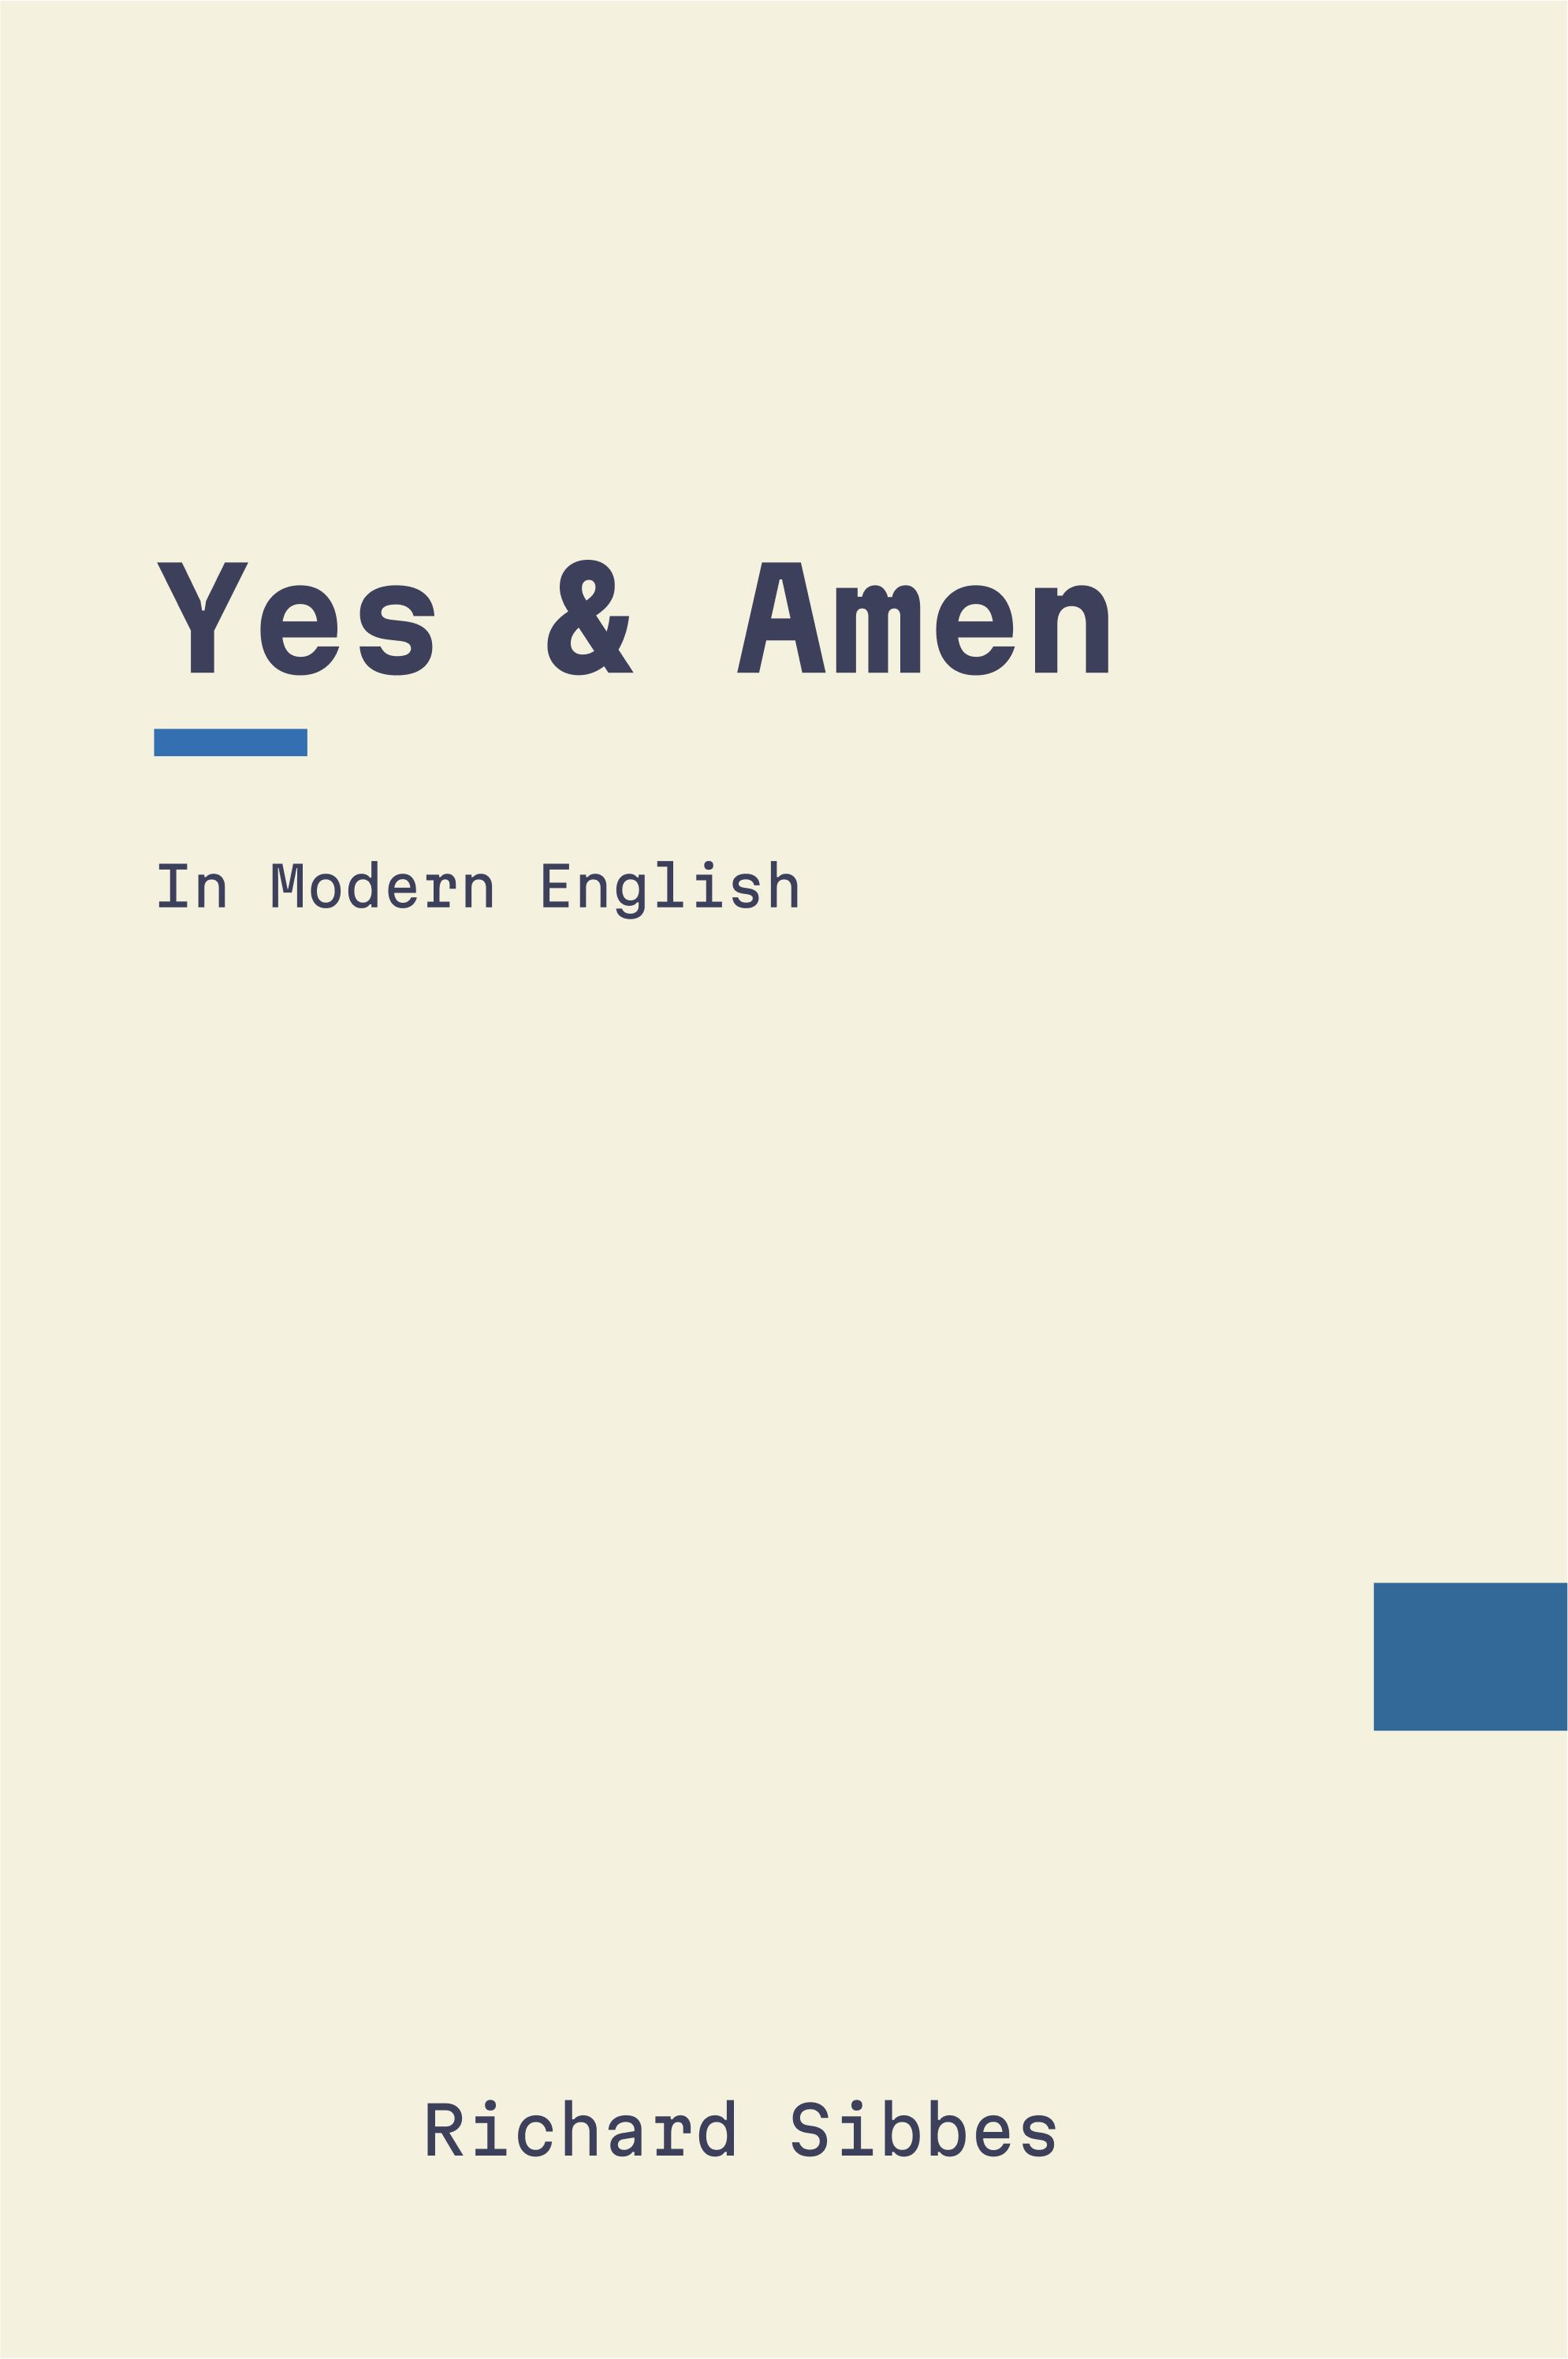 Yes and Amen by Richard Sibbes